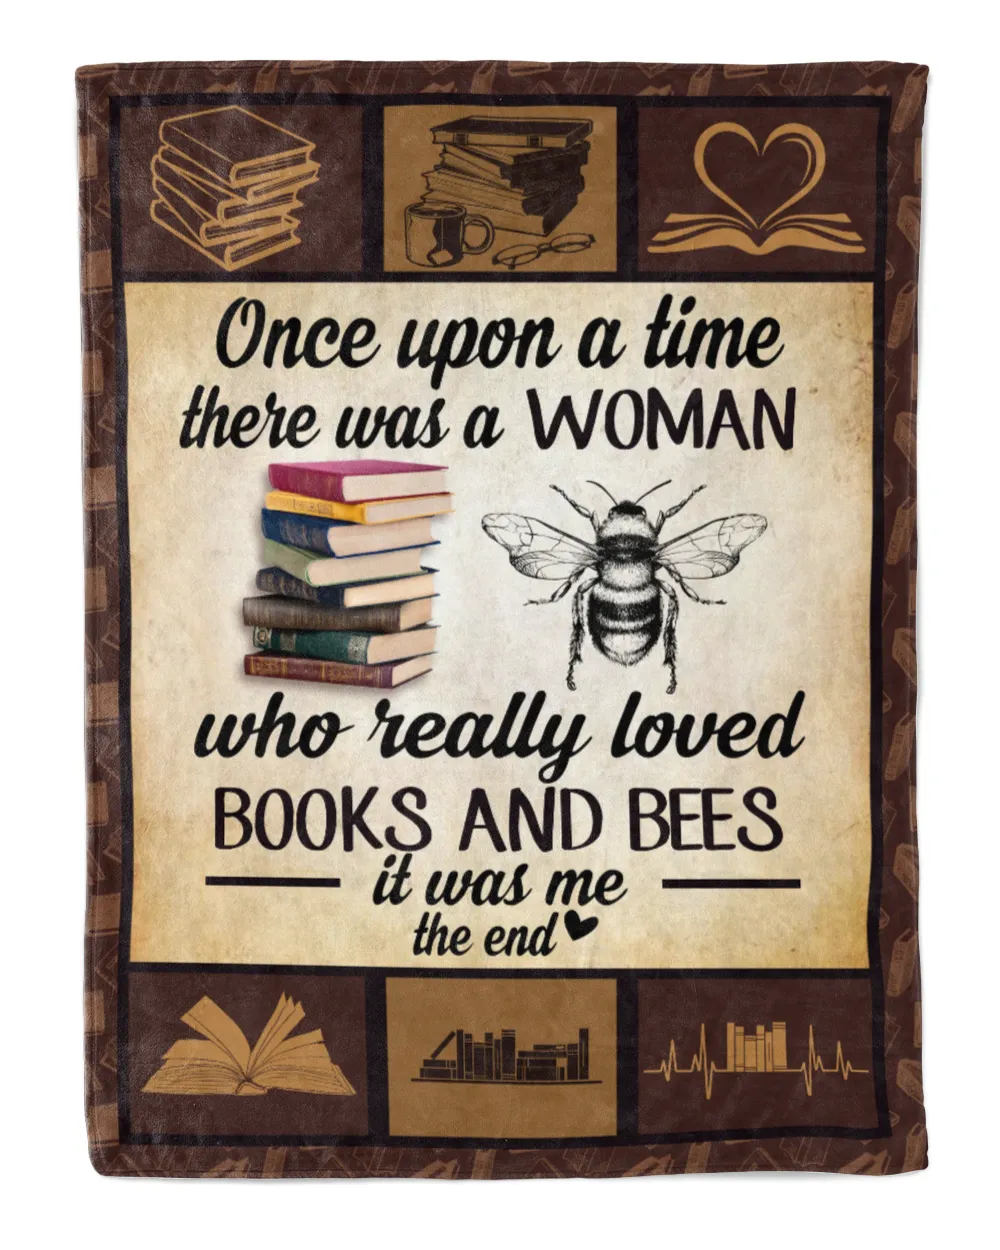 Once upon a time - books and bees